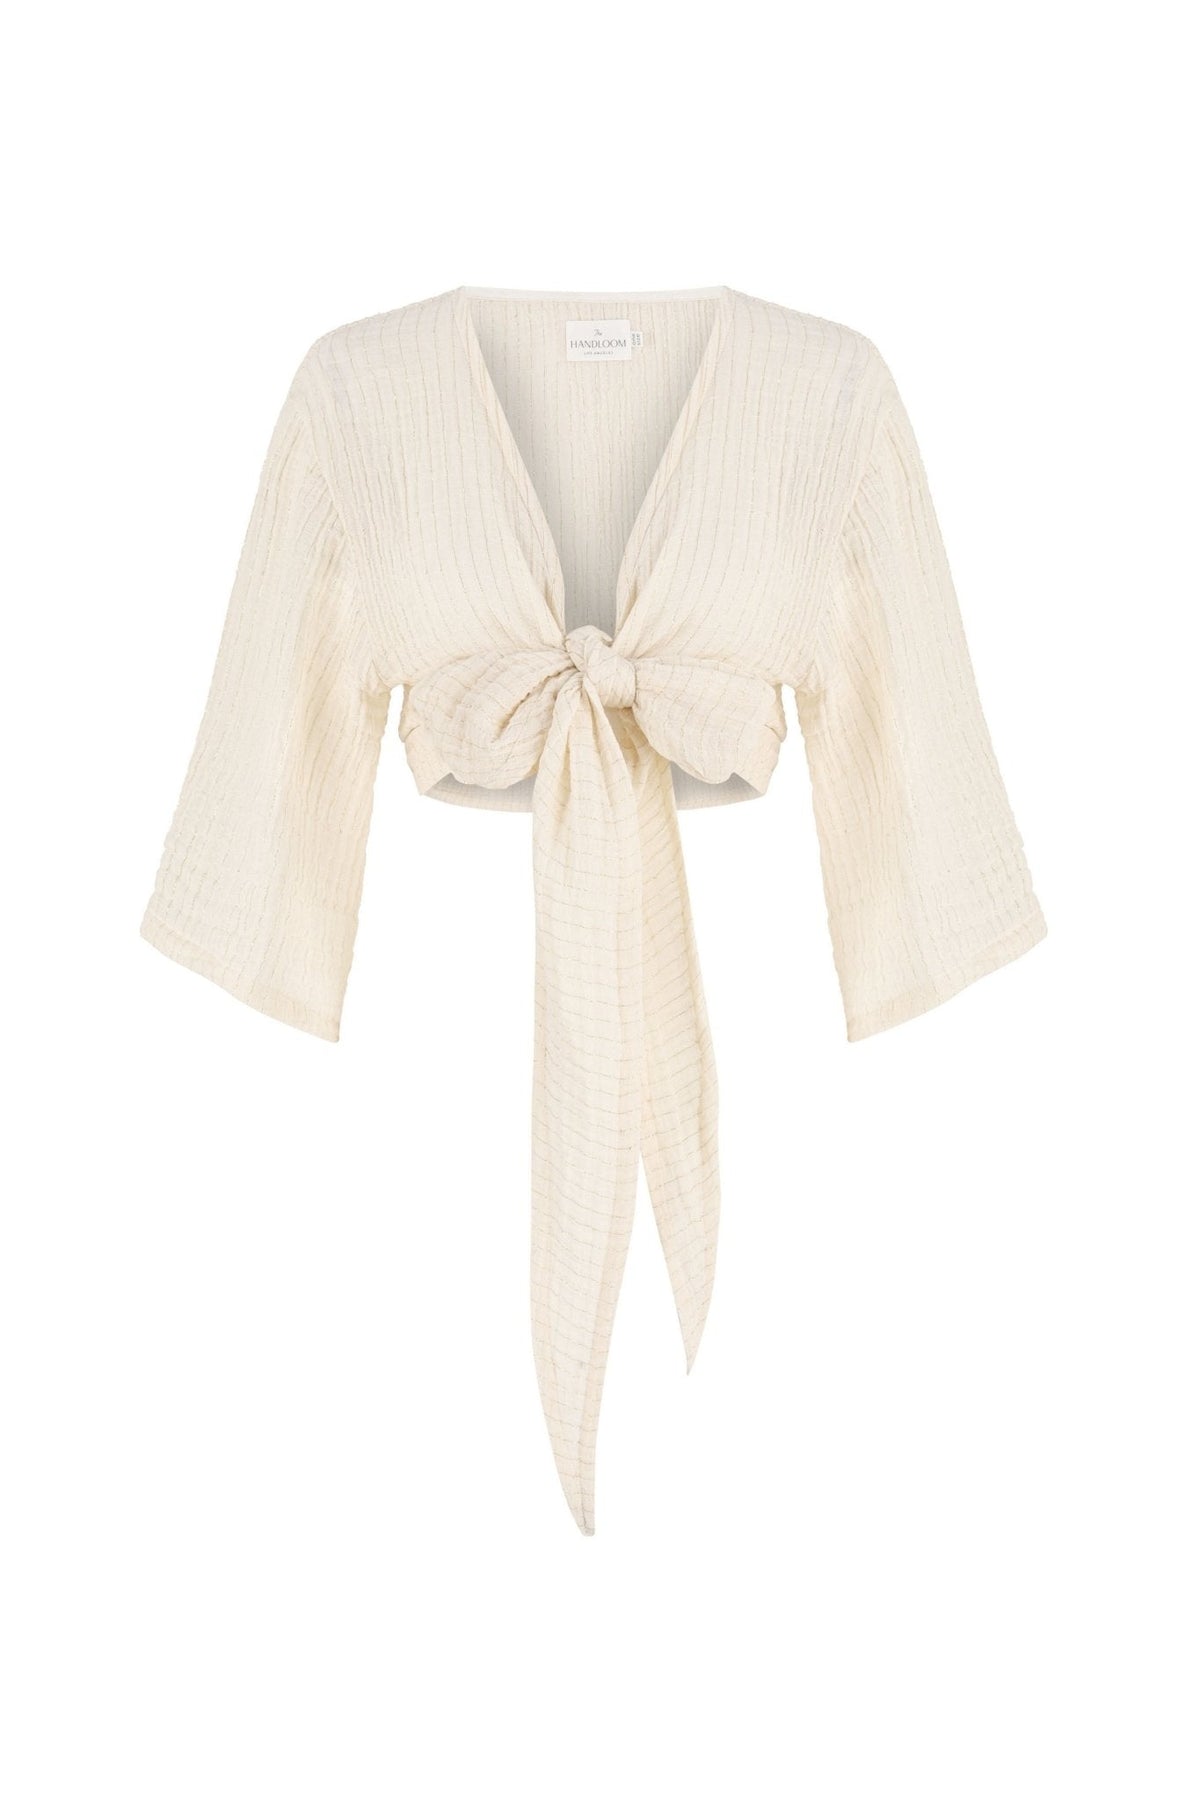 THE HAND LOOM Bali Wrap Top - Natural With Gold Stripes